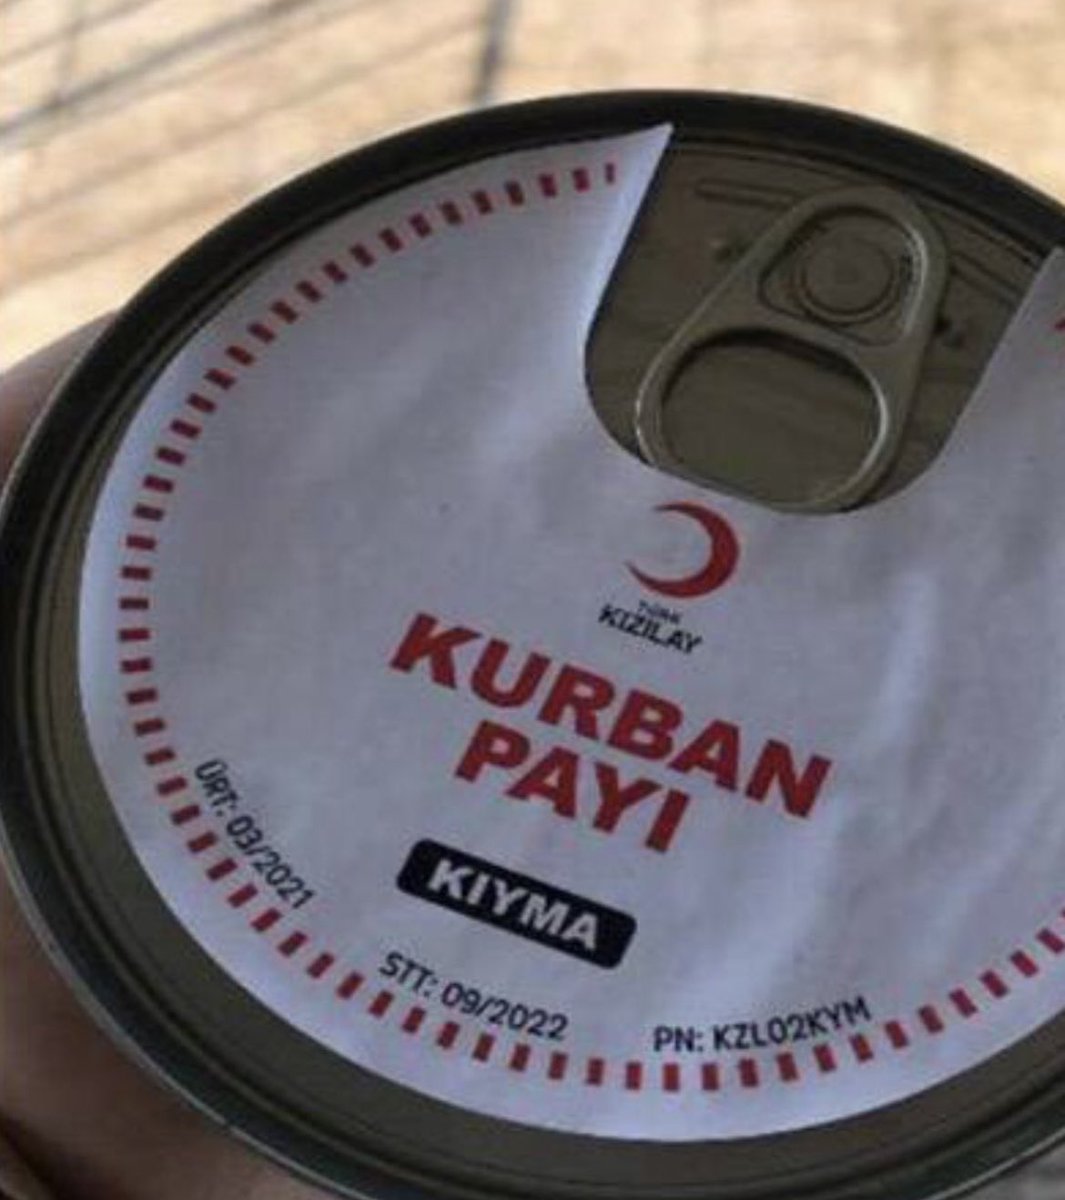 Turkish Red Crescent distributed minced meat in the earthquake zone, whose expiration date was in September 2022.
There are striking findings in the report of the Chamber of Food Engineers.
#TayyipErdoganResign !
#TayyipErdoğanİstifa !